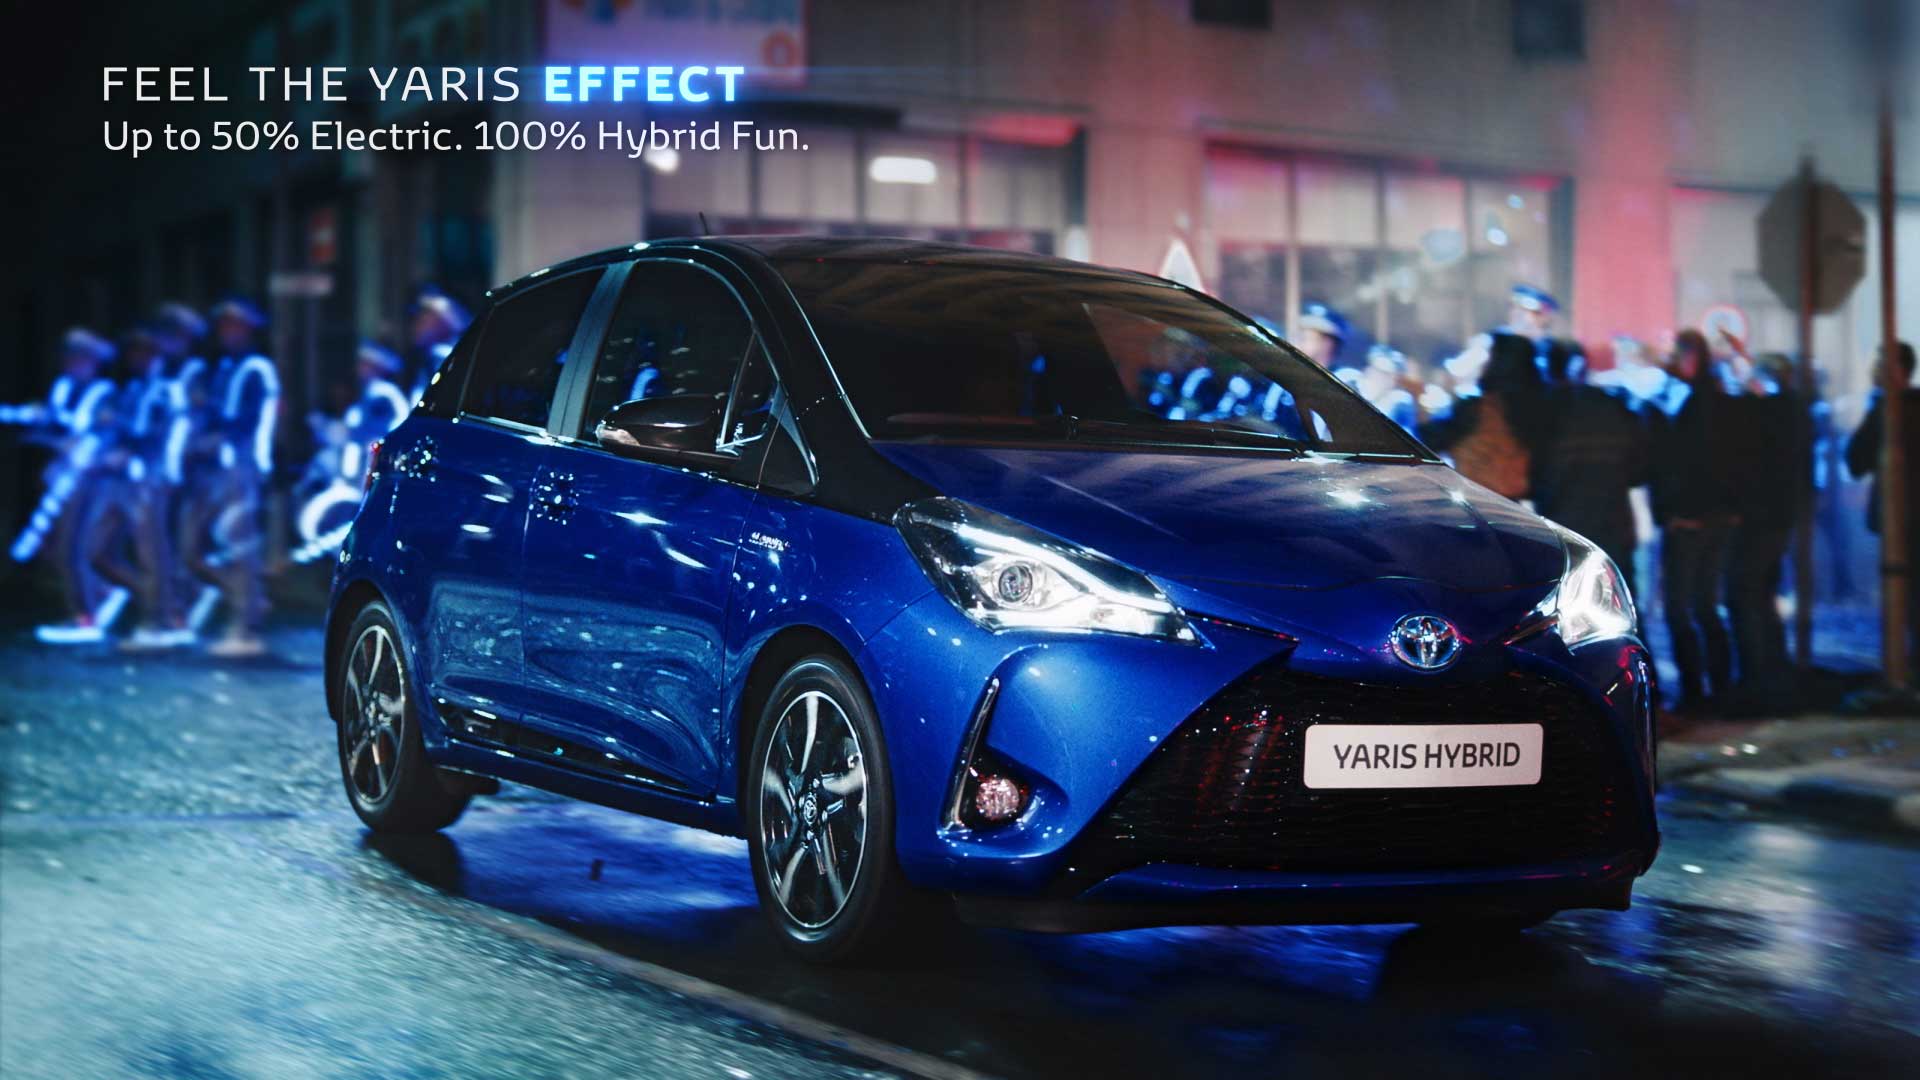 Car at night with lights. Still from Toyota Yaris commercial.